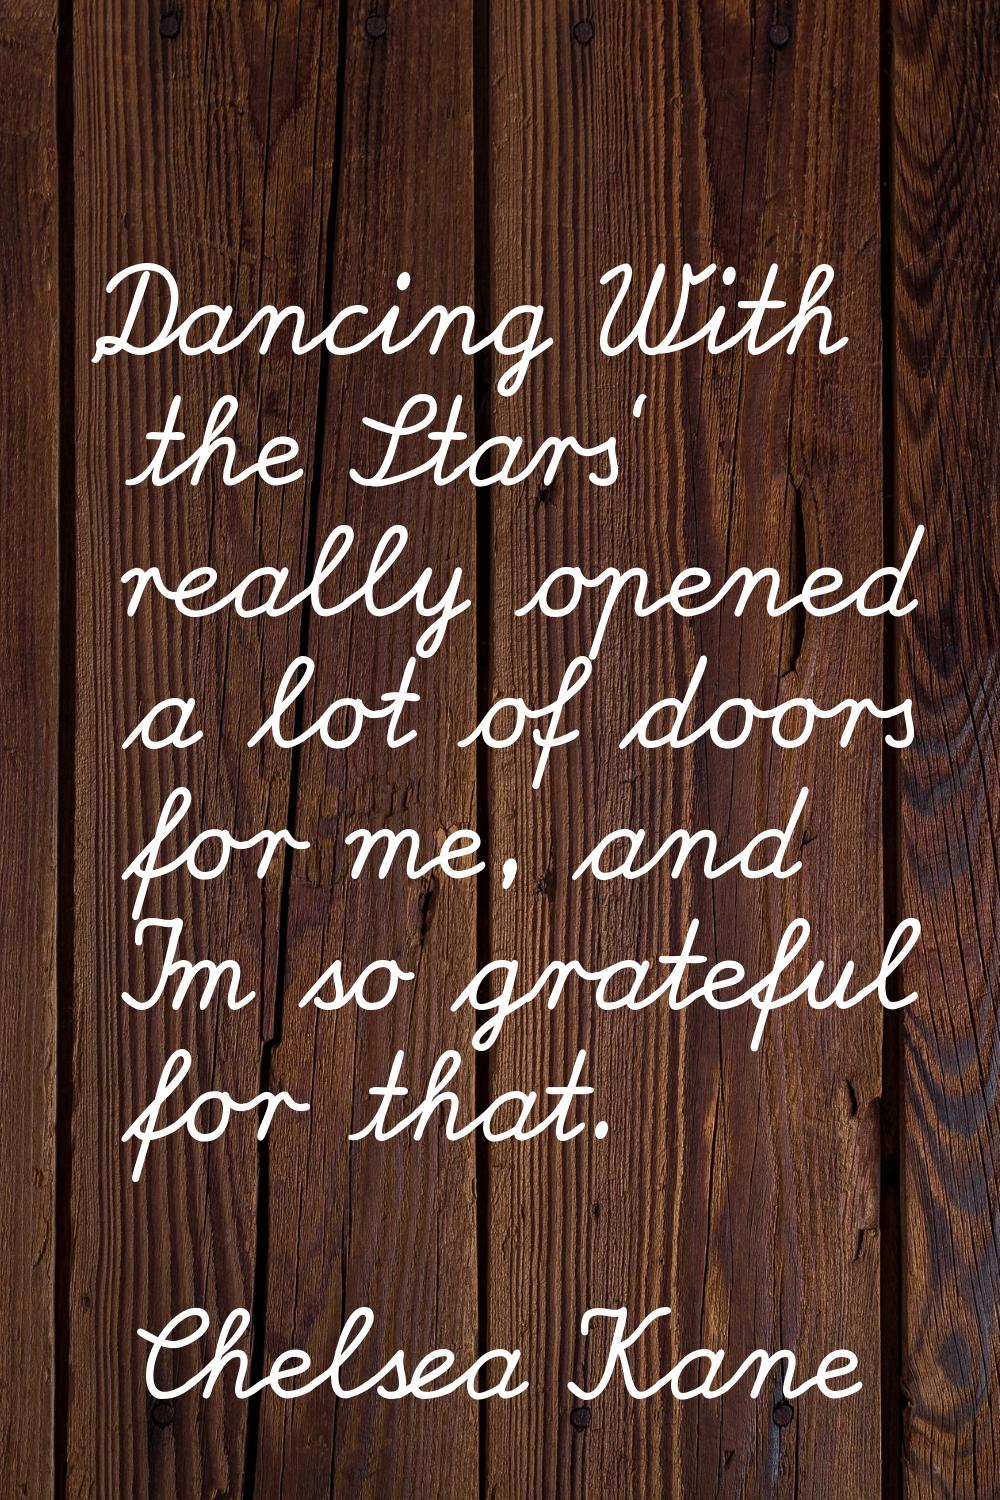 'Dancing With the Stars' really opened a lot of doors for me, and I'm so grateful for that.